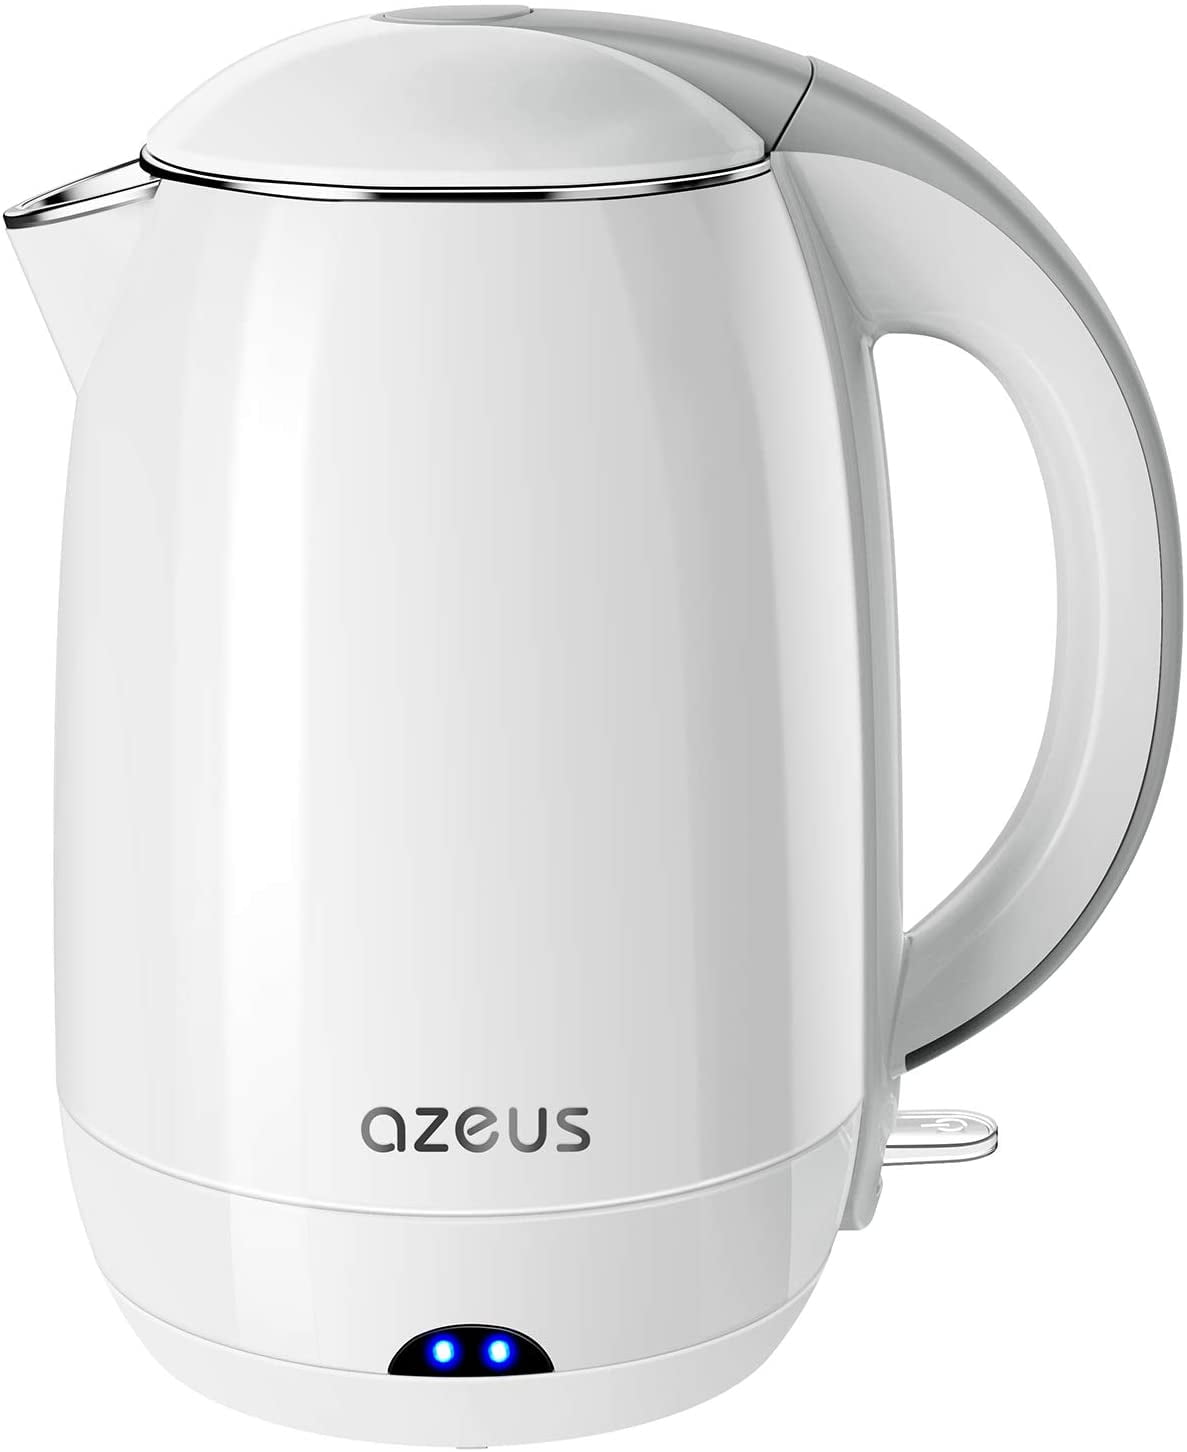 Auto-Shutoff Safety Feature BPA Free Interior 1.8 Liter/1.9 Qt New House Kitchen Electric Cordless Glass Kettle with Tea Infuser LED Lighting 